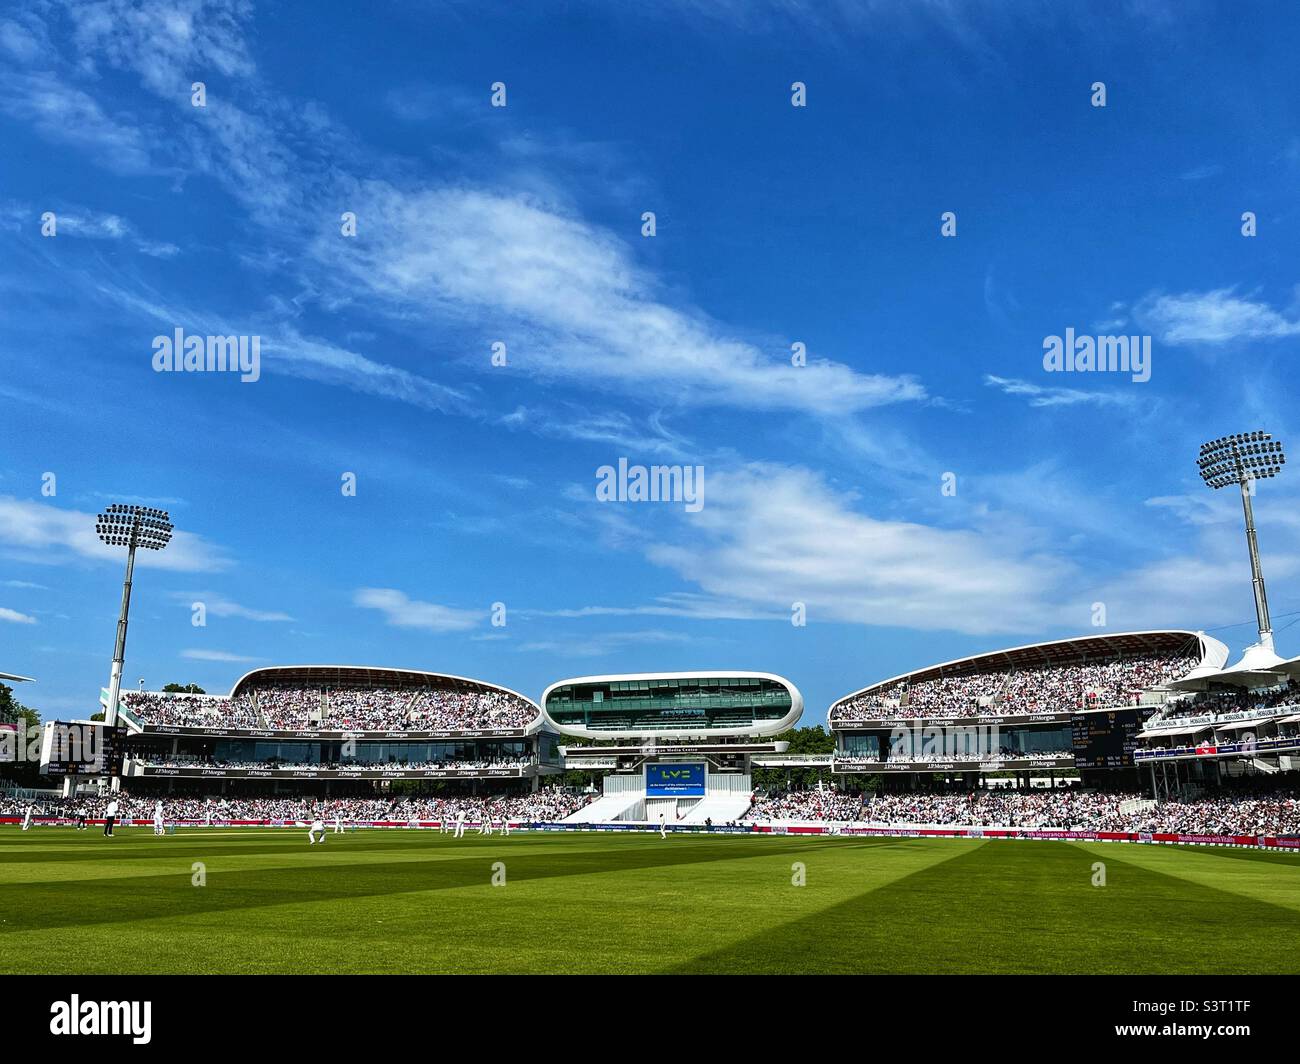 The media centre overlooking the cricket pitch at Lord’s in London. Stock Photo